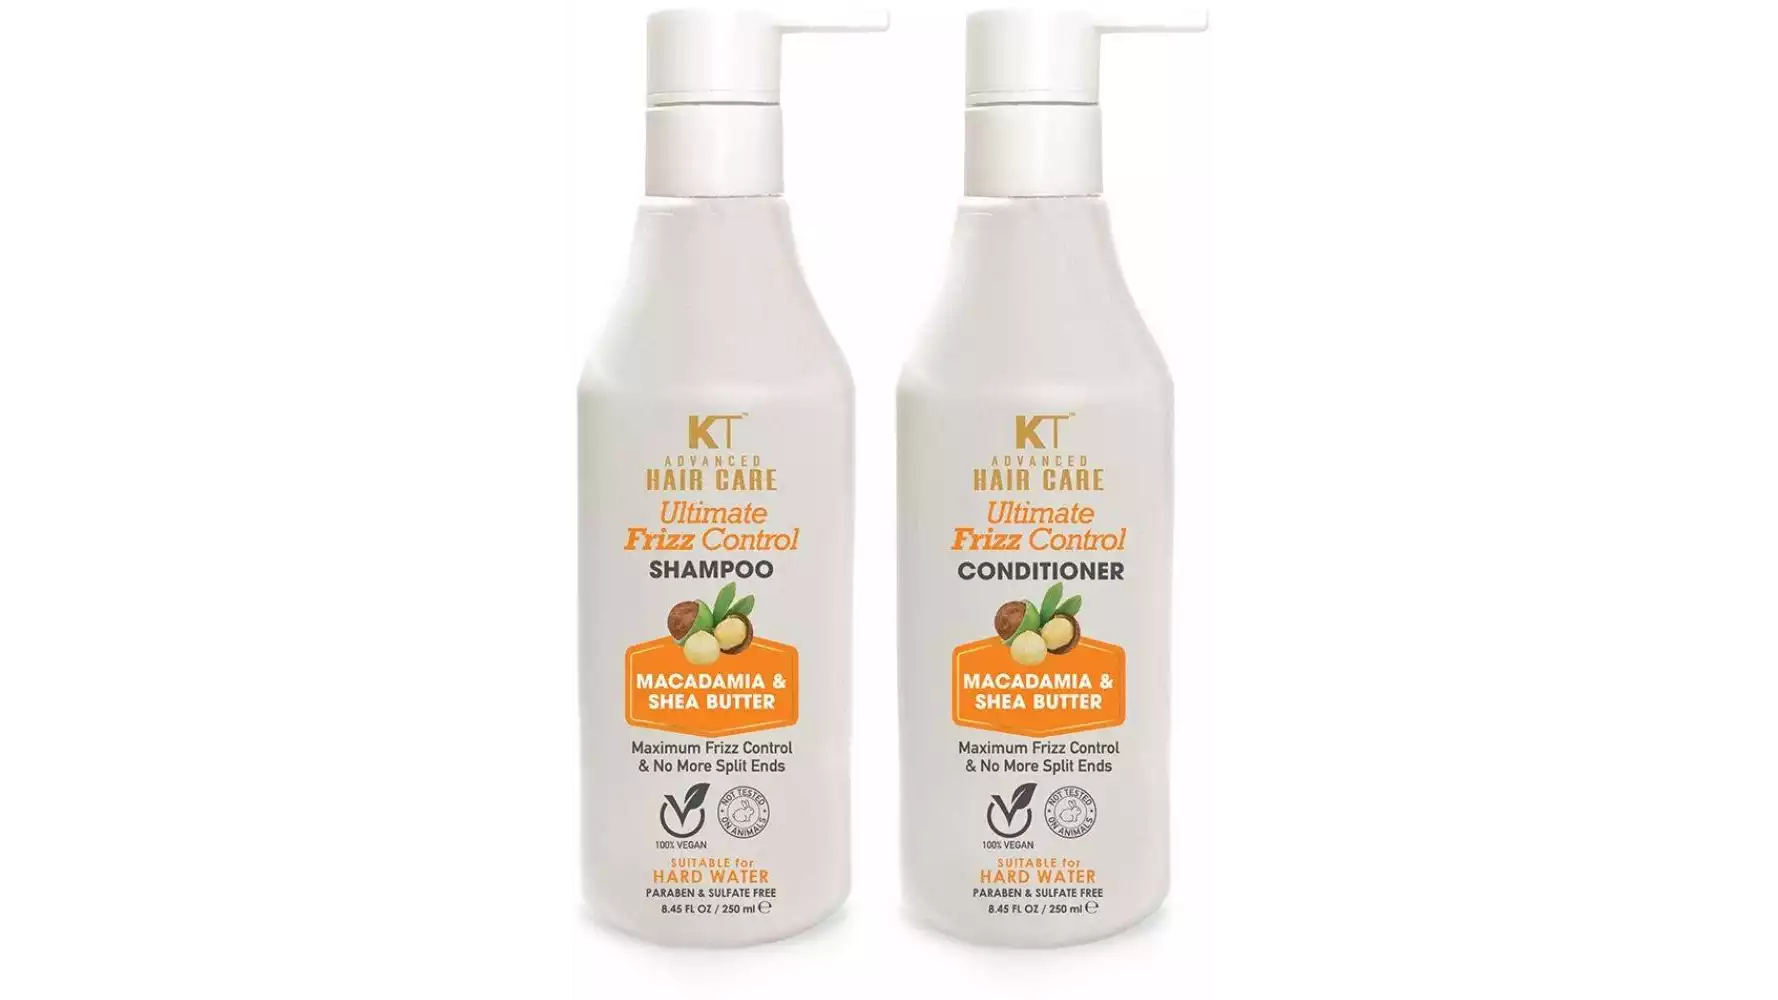 KT Advanced Hair Care Ultimate Frizz Control Shampoo & Conditioner (250ml, Pack of 2)